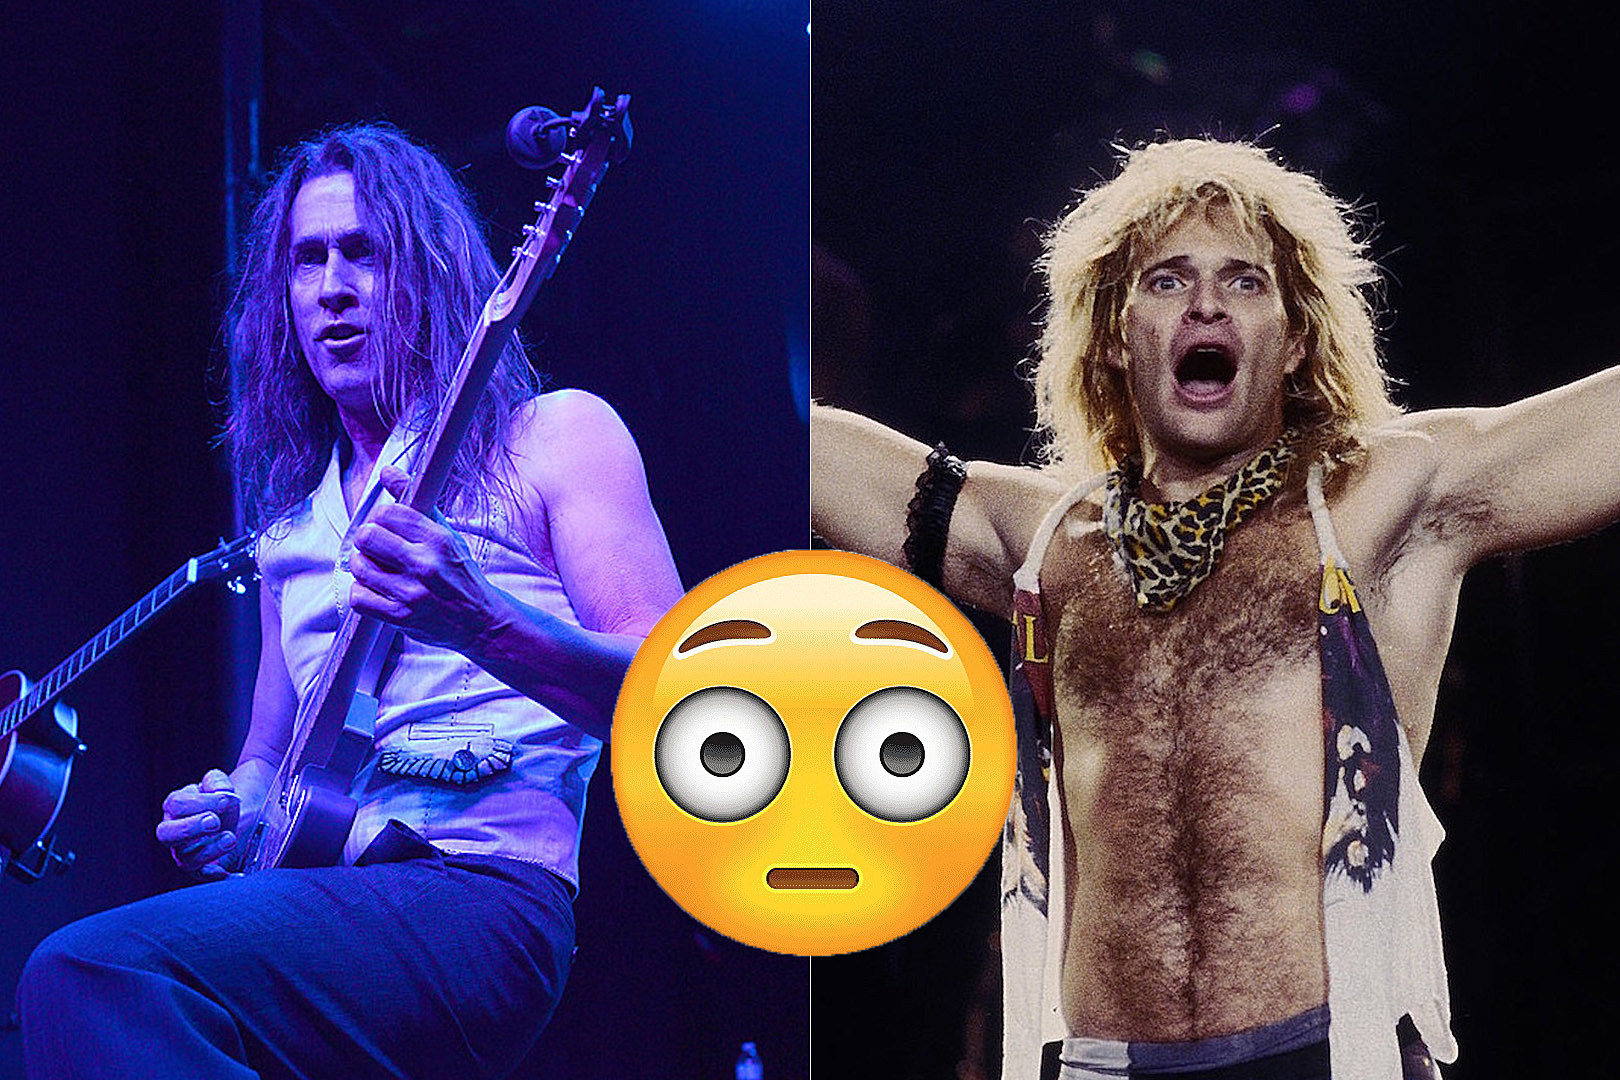 Jeff Young Didn't Want to Audition for David Lee Roth's Band